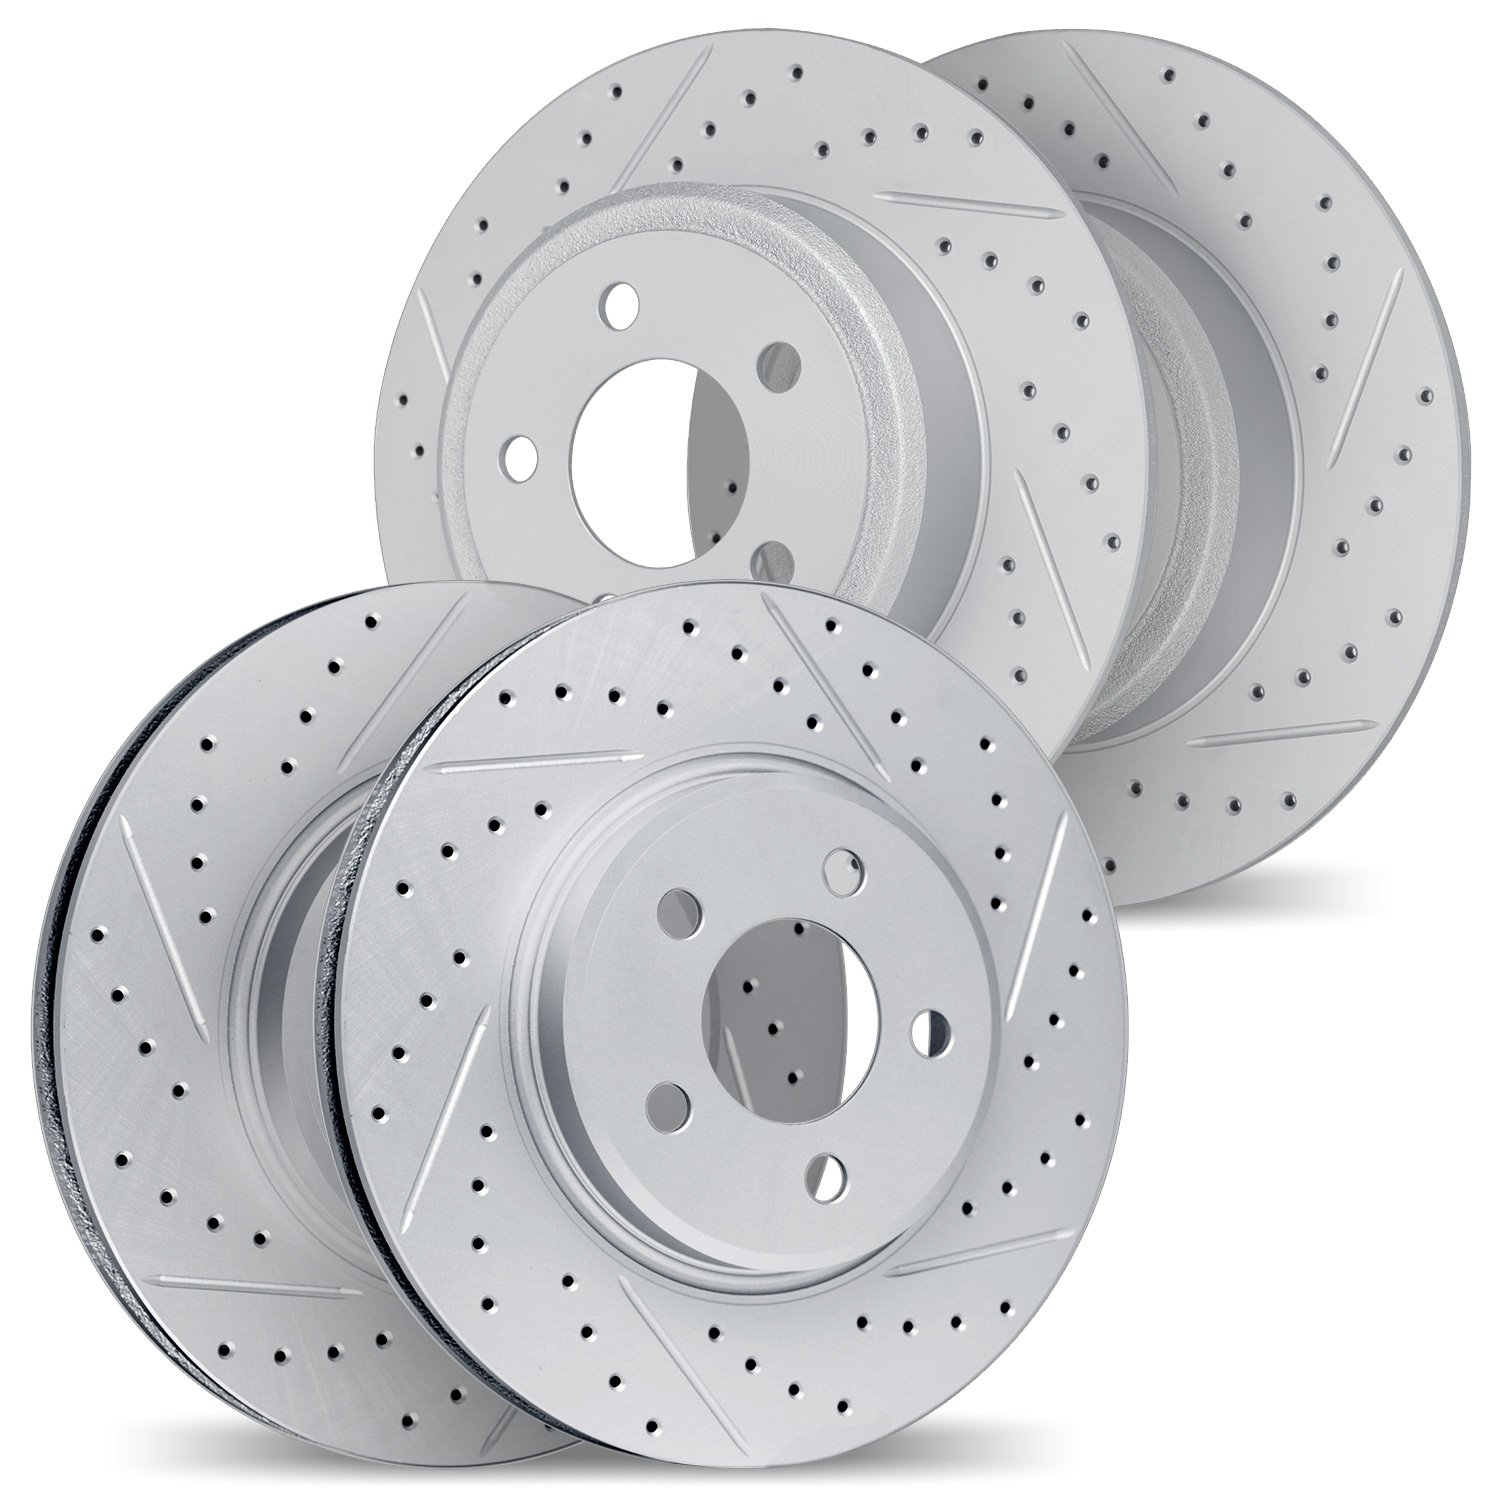 2004-13026 Geoperformance Drilled/Slotted Brake Rotors, 2008-2008 Subaru, Position: Front and Rear